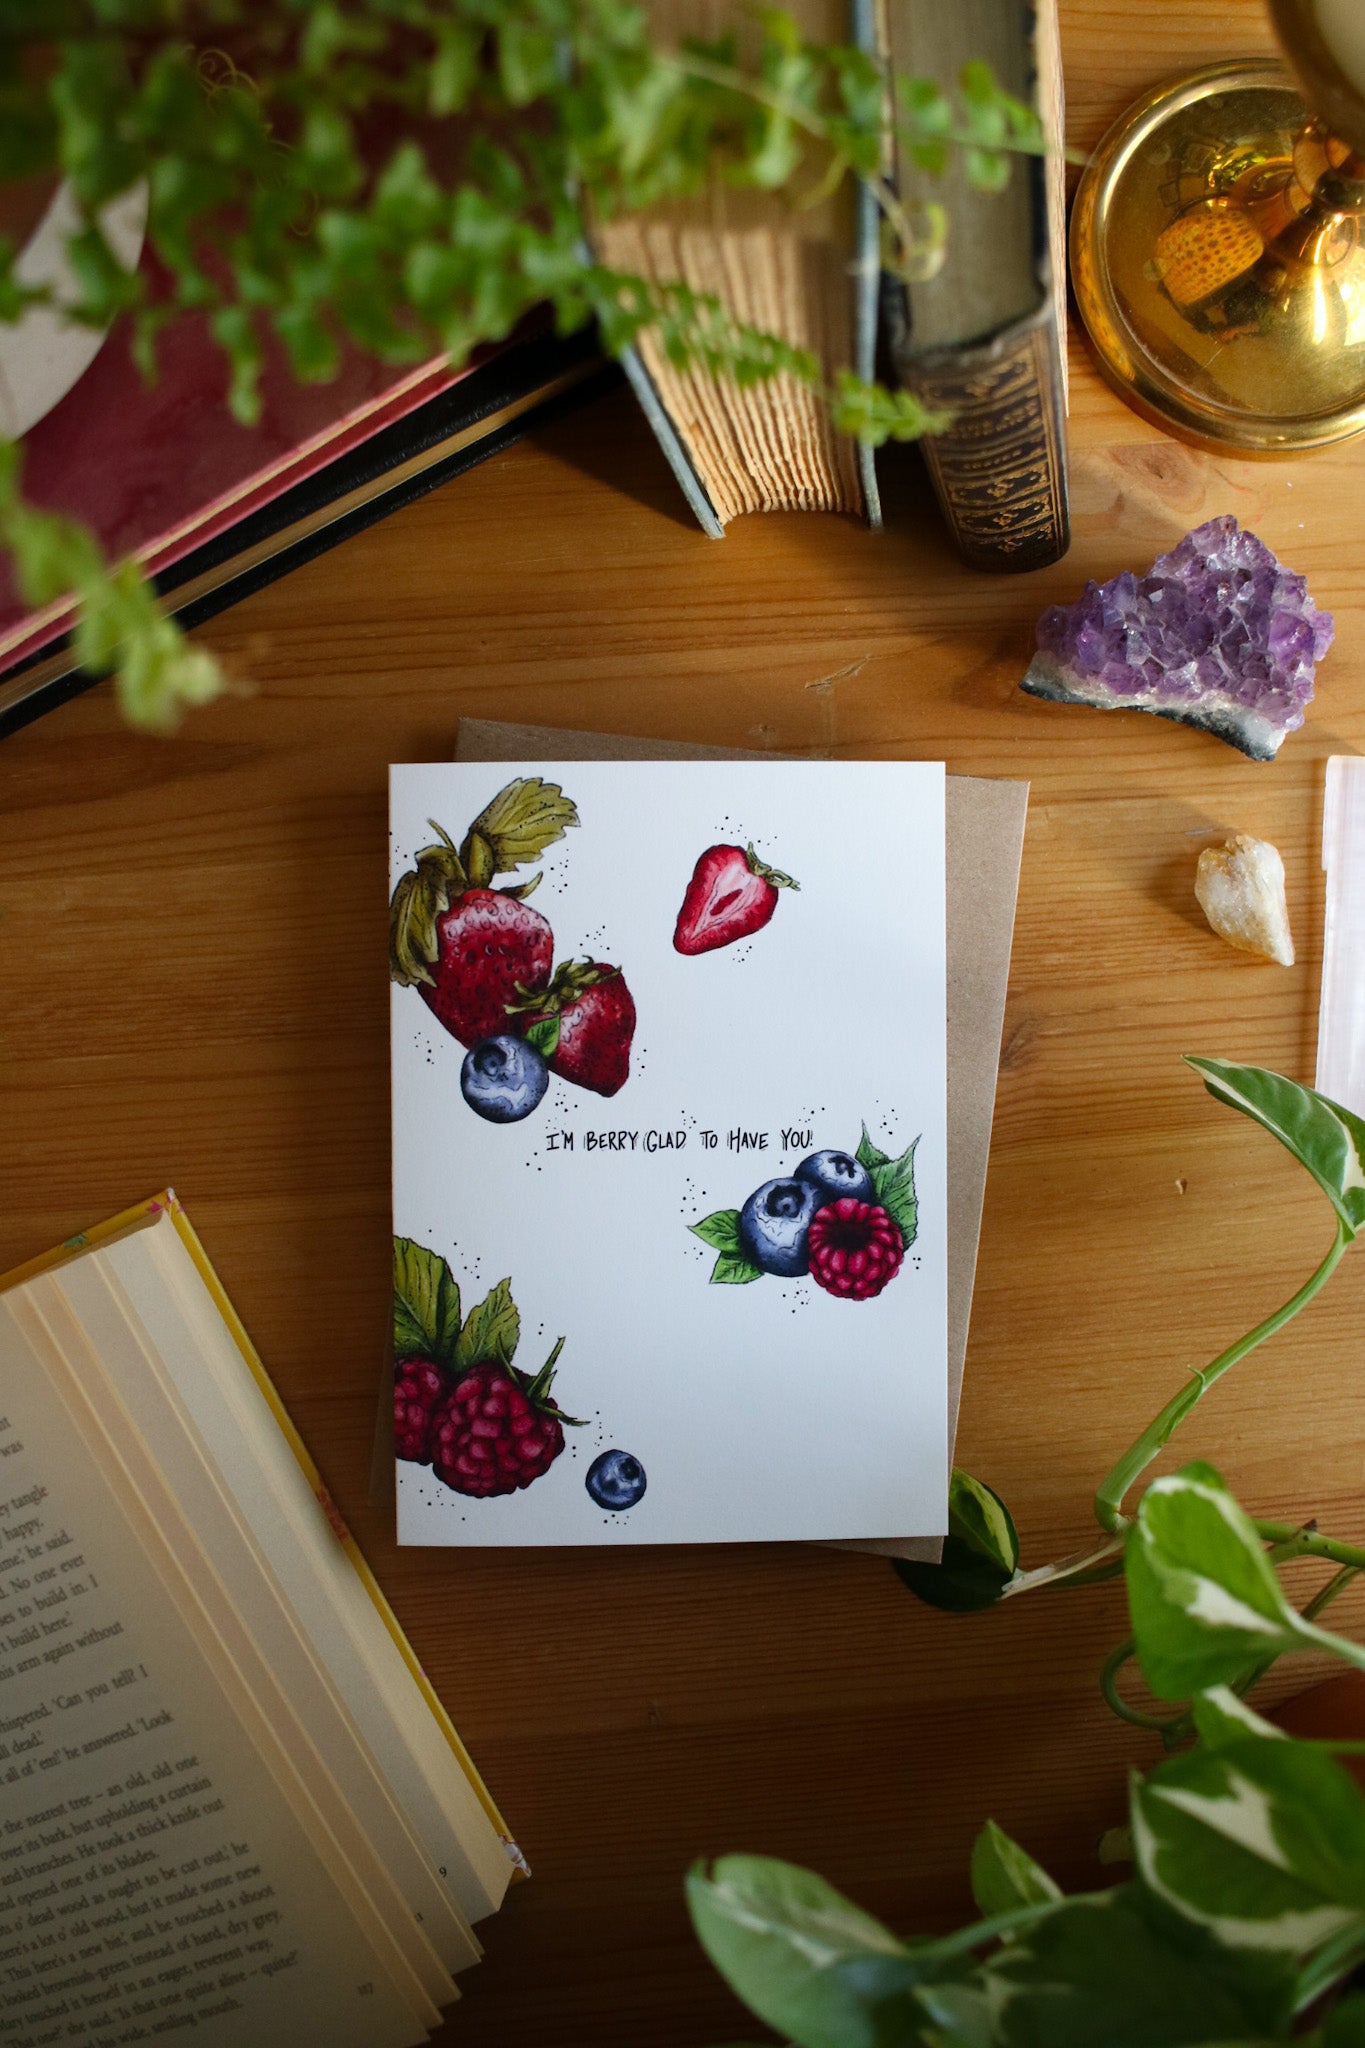 I'm Berry Glad to Have You! - Greeting Card